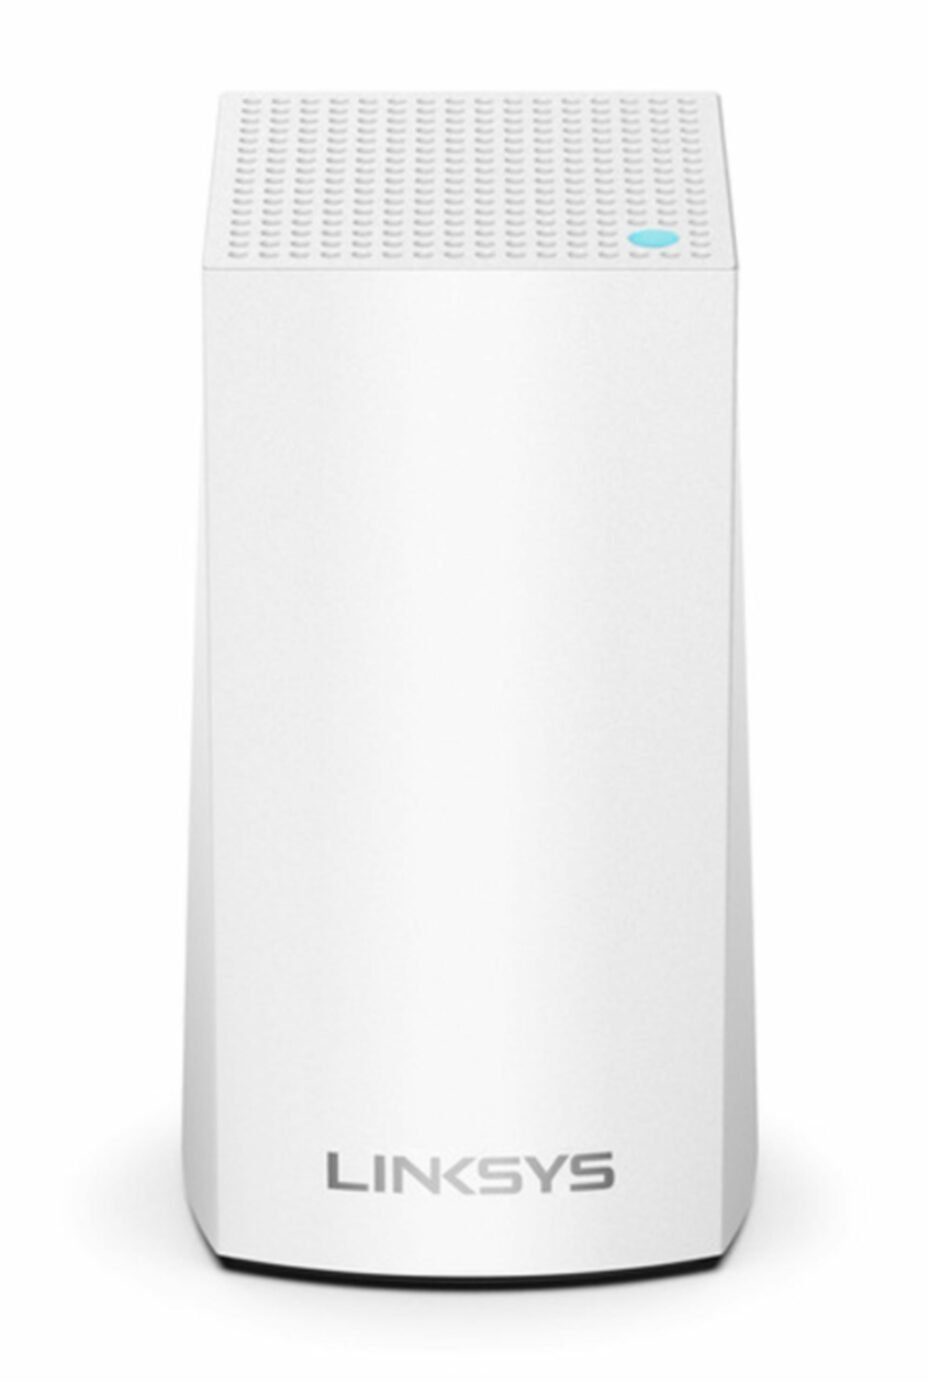 Linksys Velop AC3900 Dual-Band Mesh Wi-Fi System Review